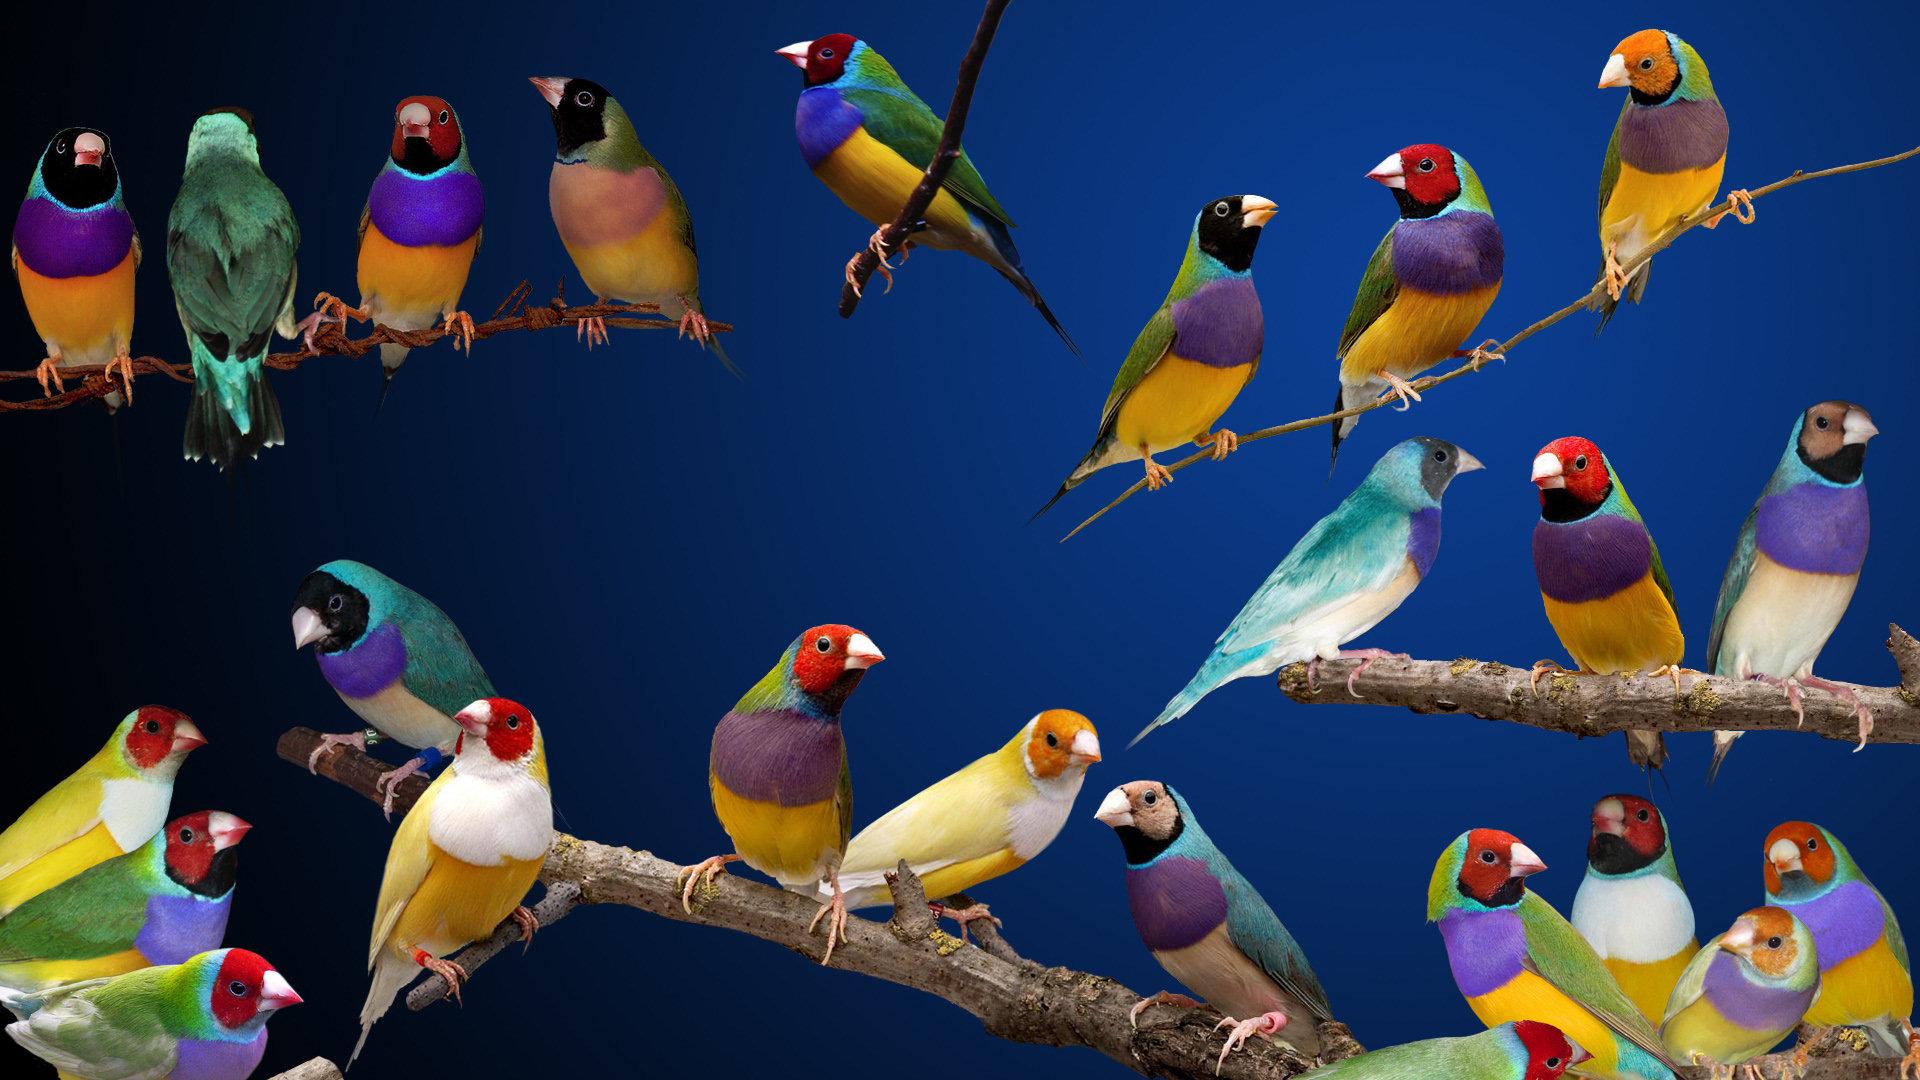 gouldian finches HD Wallpaper. Background Imagex1080